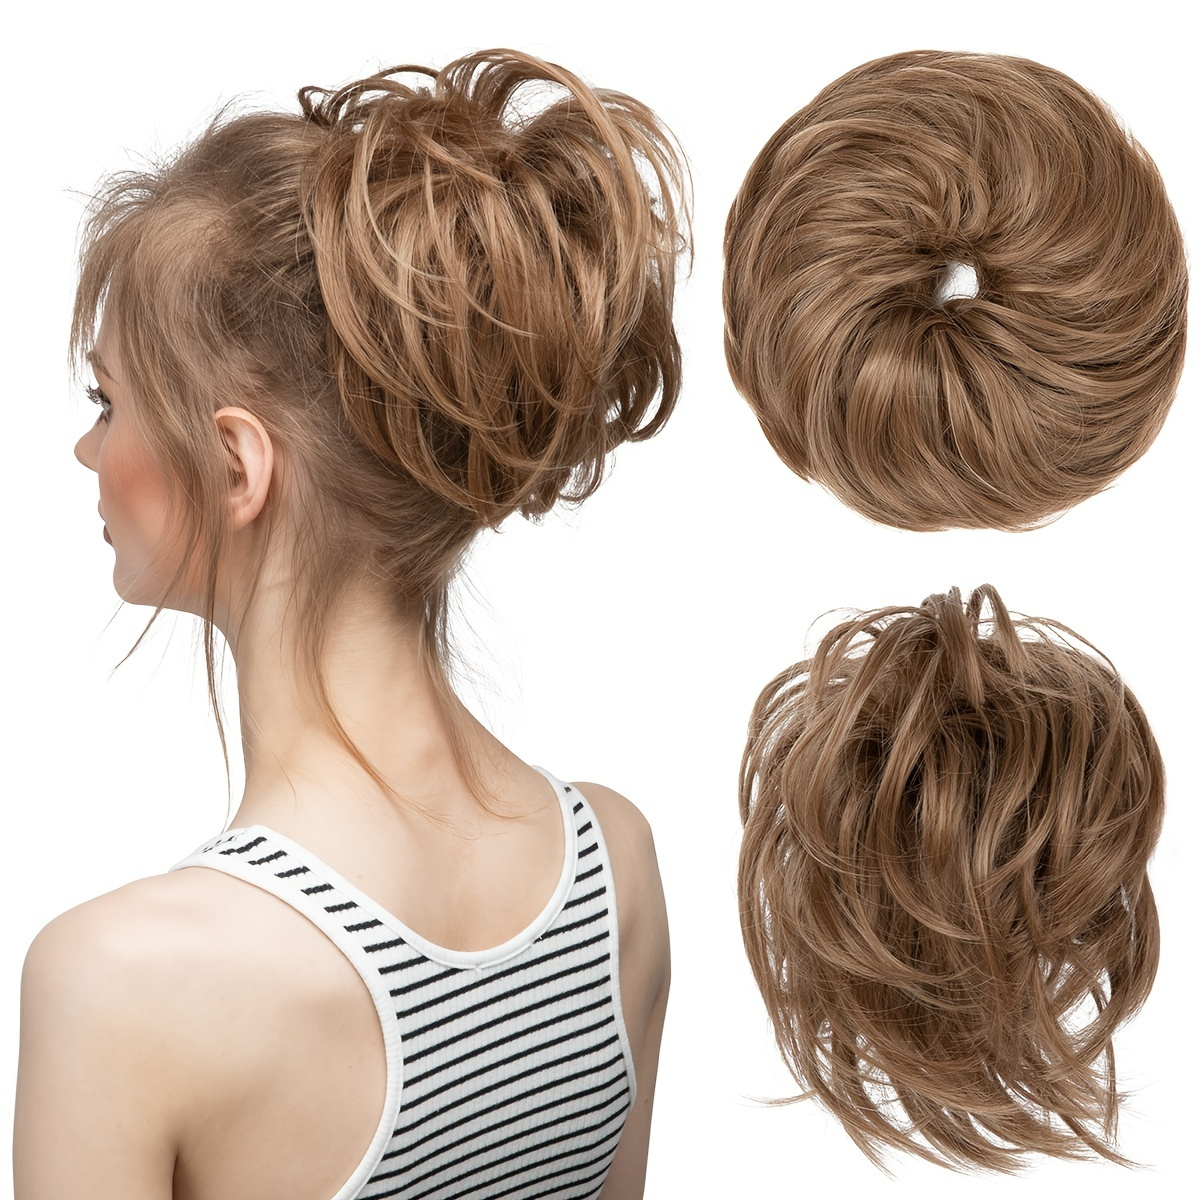 

Instant Updo Hair Piece - Messy Bun, Short Ponytail, And Chignon Extensions For Women And Girls - Elastic Hairpiece For Effortless Style